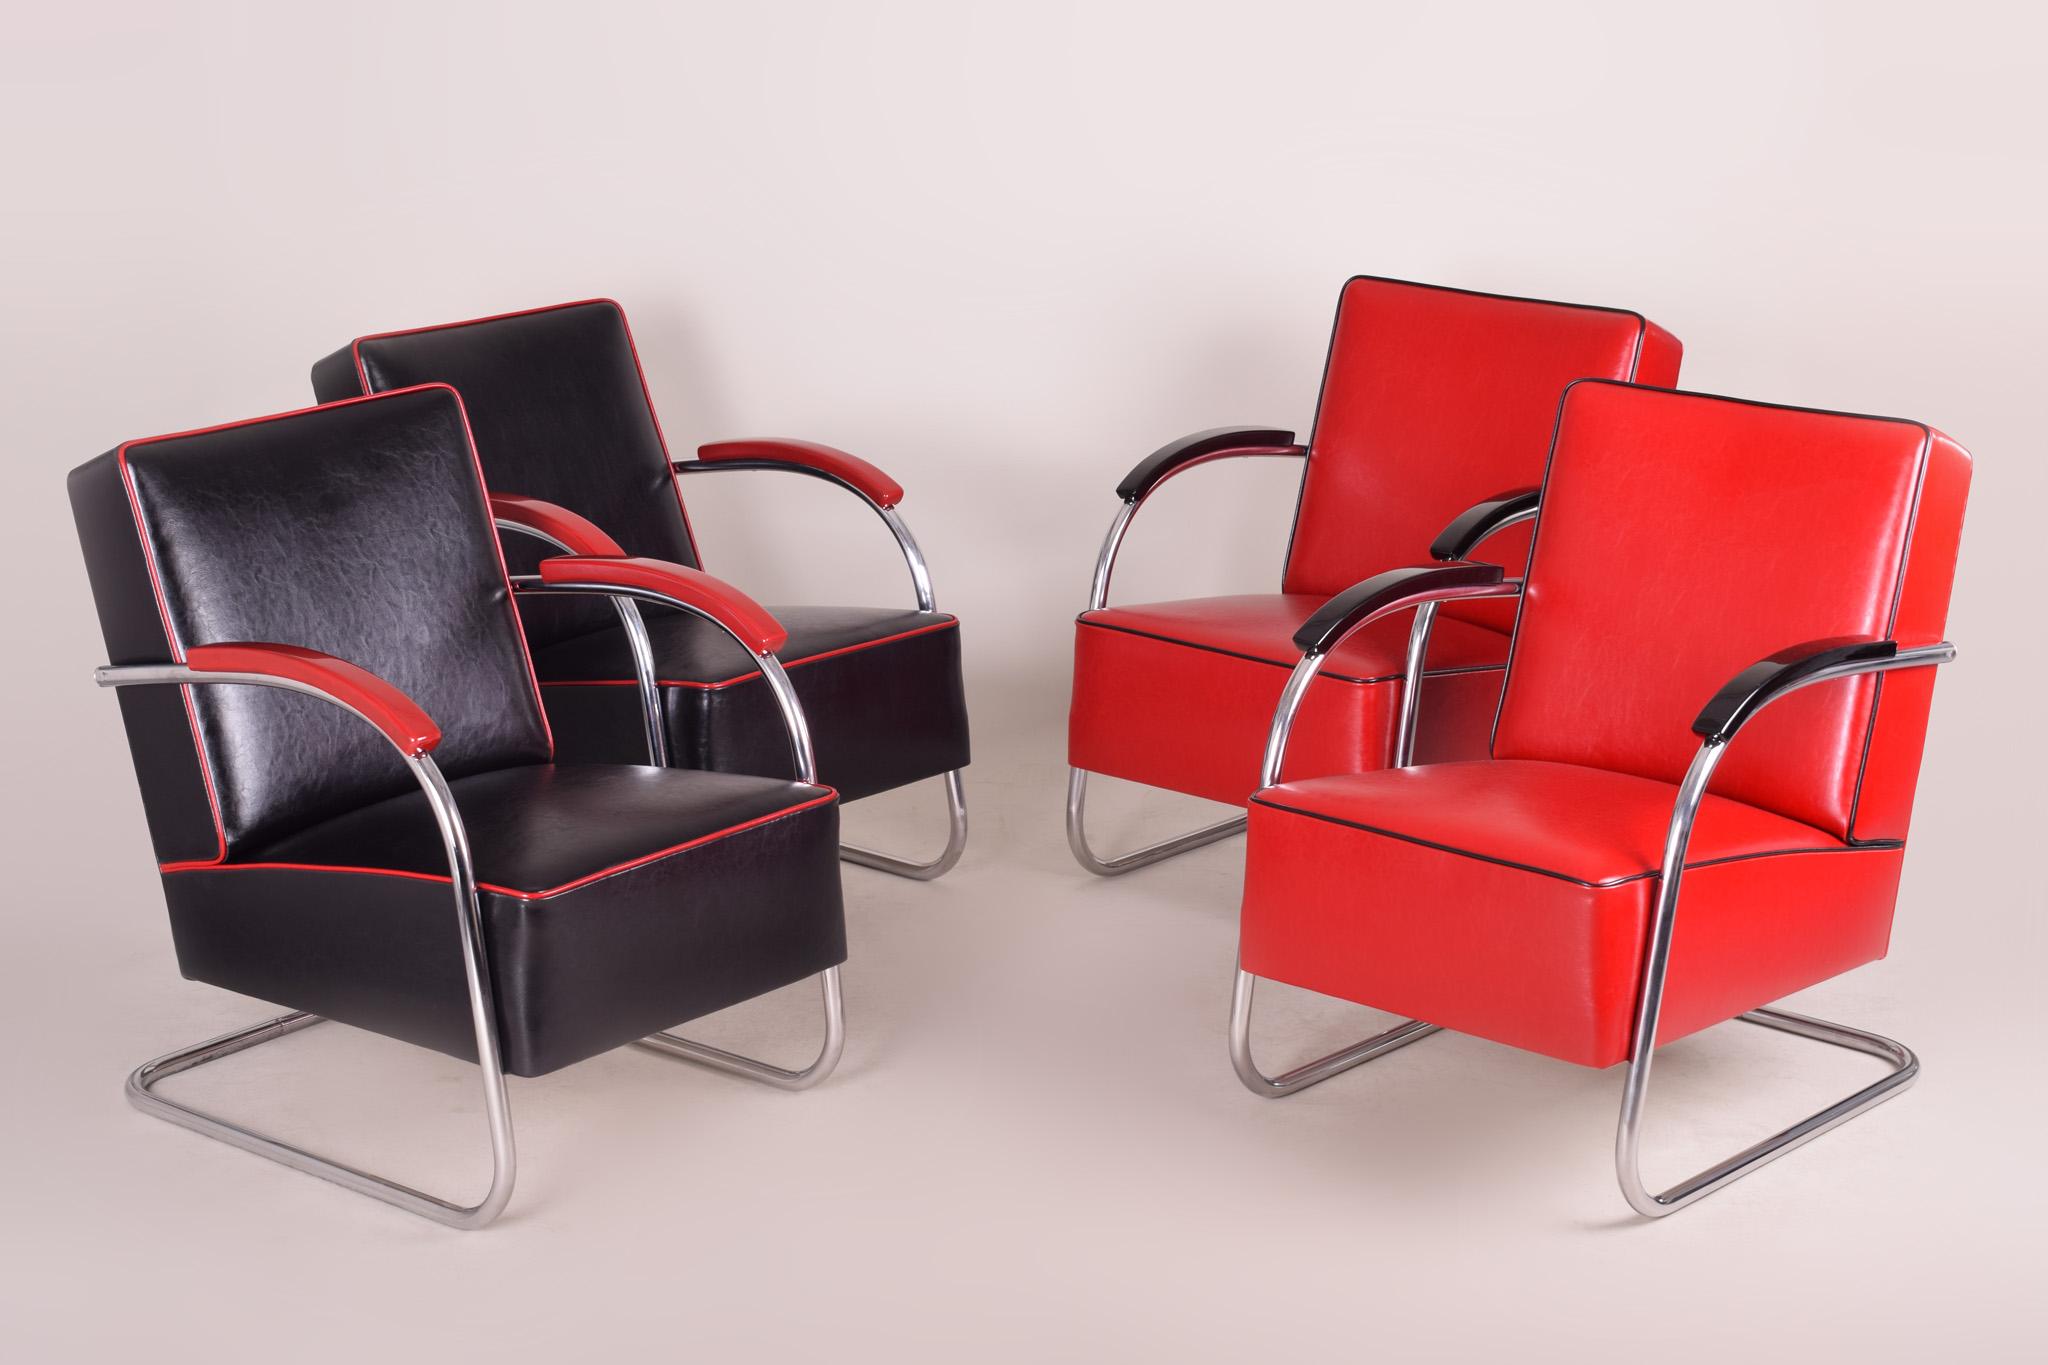 Bauhaus Art Deco armchairs and stools.
Completely restored, new upholstery and leather.
Material: Chrome
Source: Czechoslovakia, Mücke - Melder
Period: 1930-1939.

Dimensions of armchair:
Depth 80cm, width 60cm, height 80cm, seat height